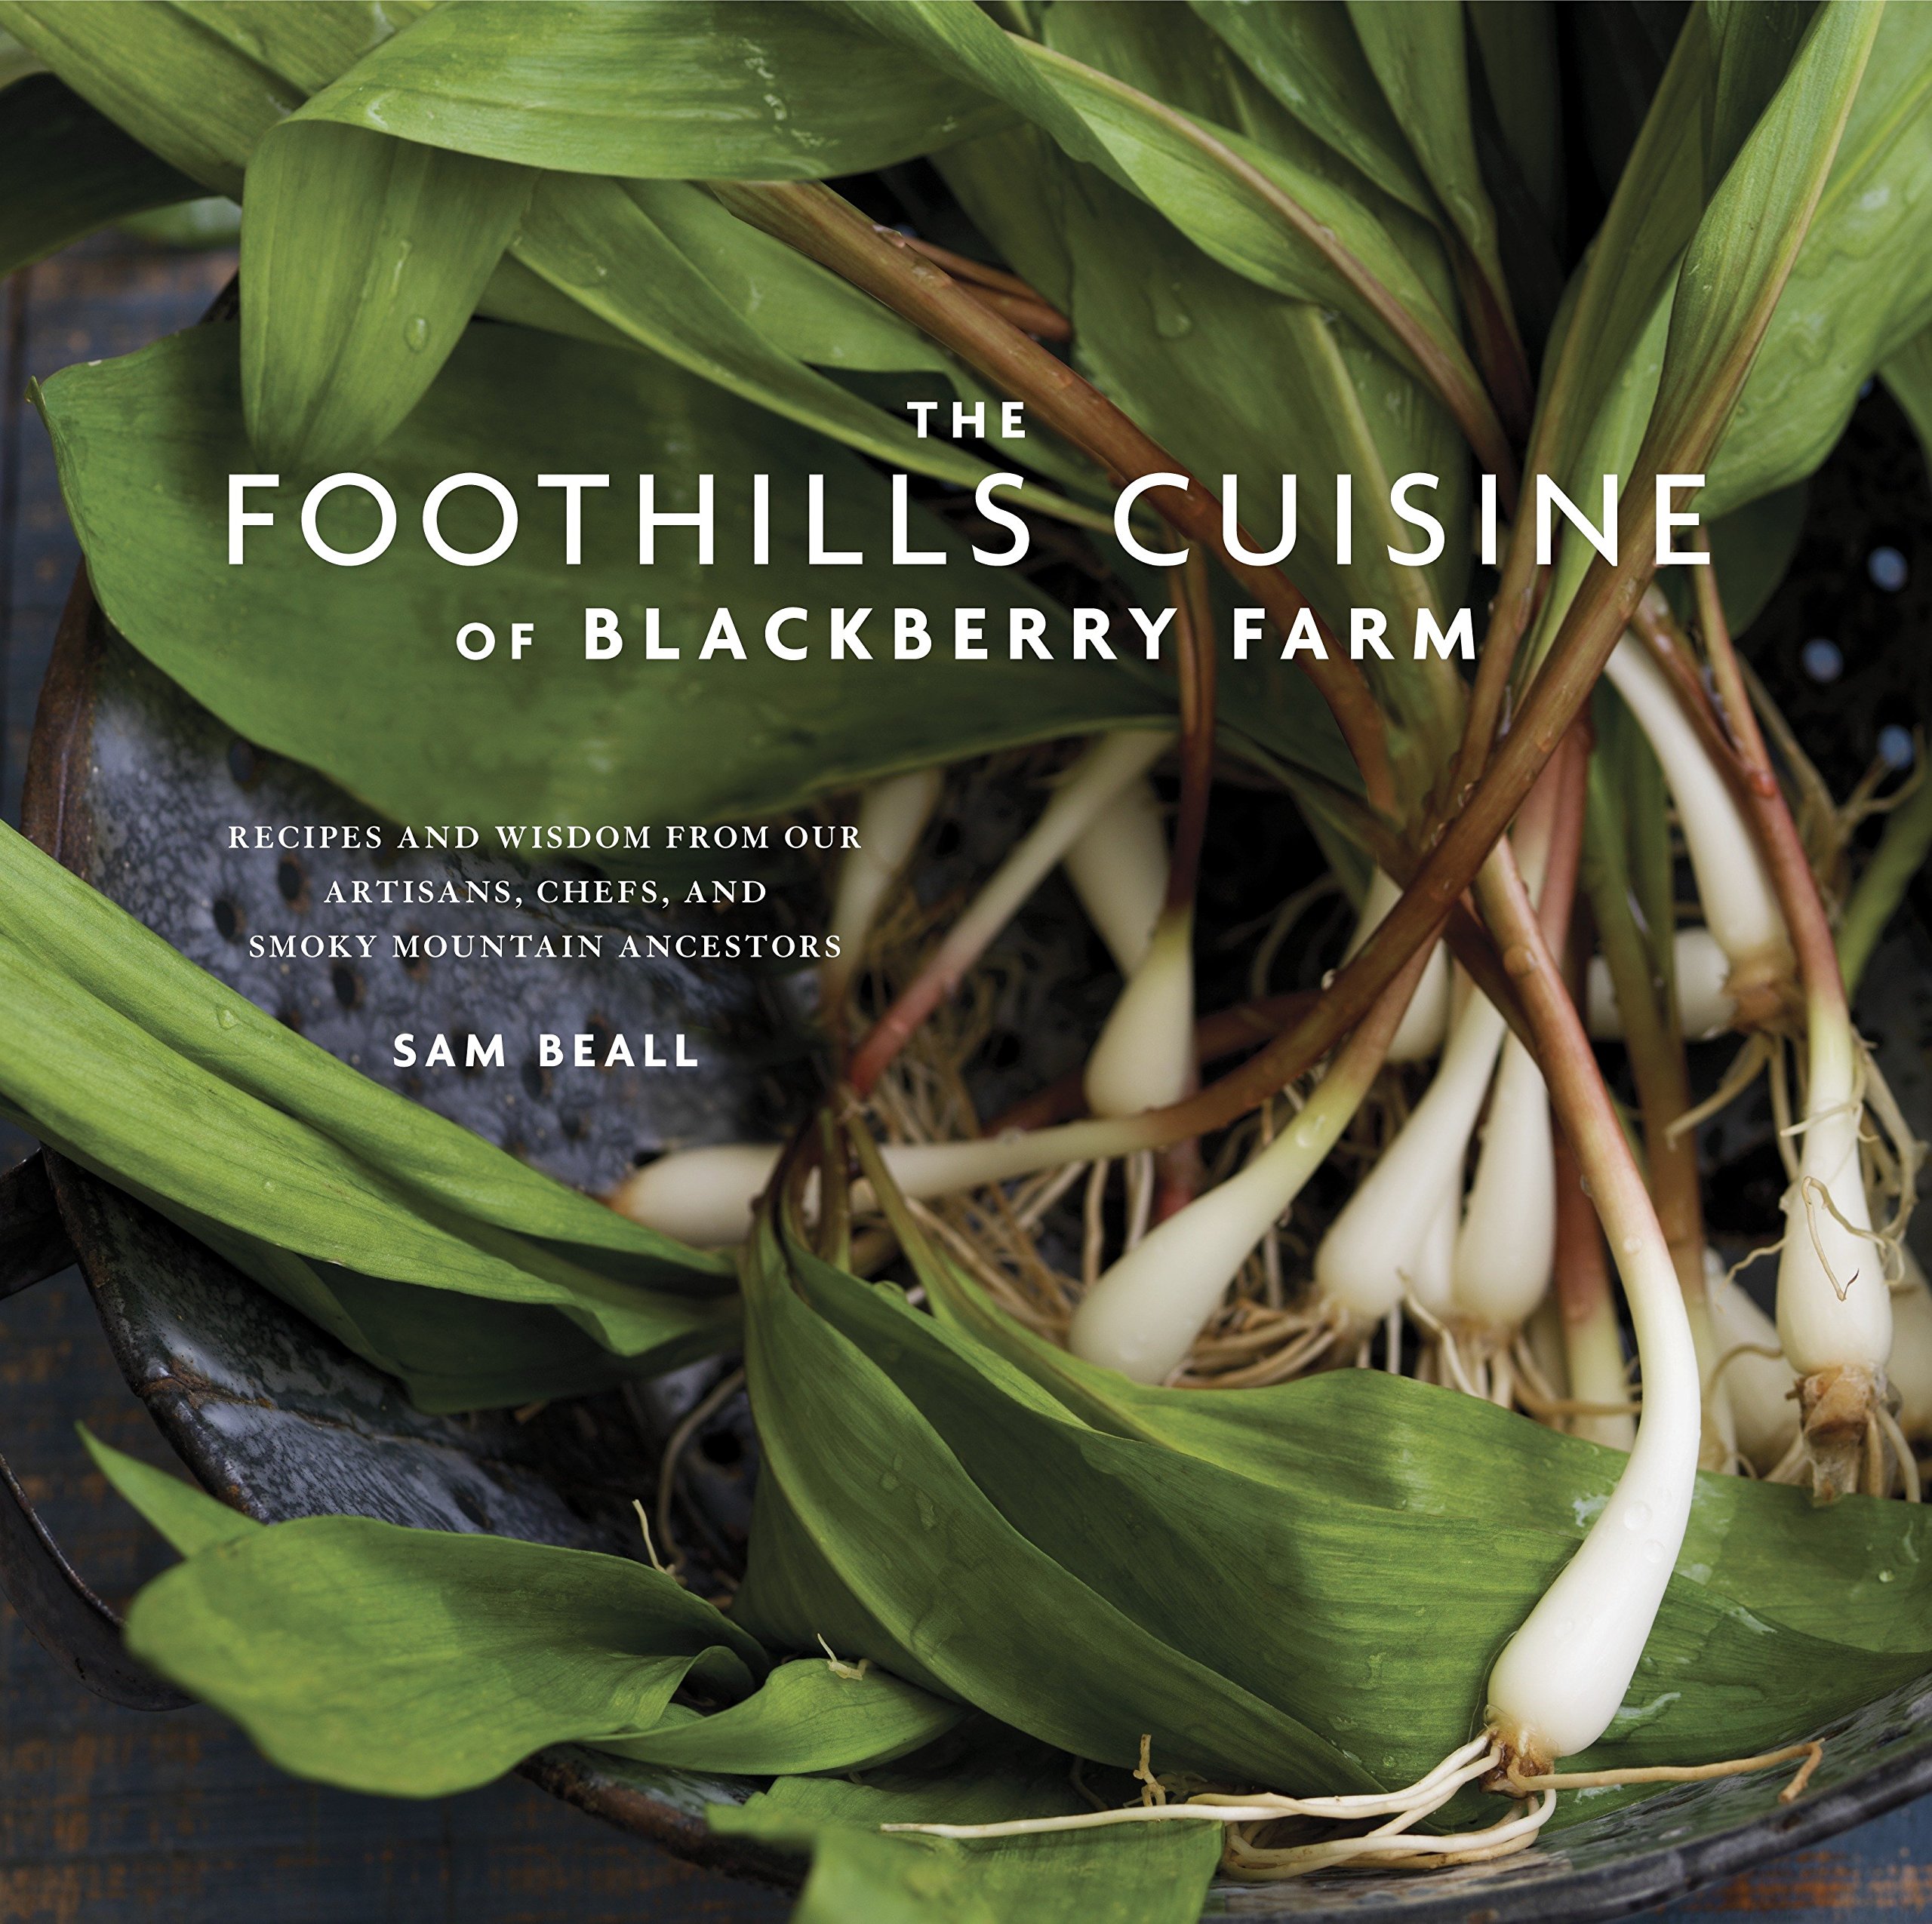 The Foothills Cuisine of Blackberry Farm: Recipes and Wisdom from Our Artisans, Chefs, and Smoky Mountain Ancestors : A Cookbook